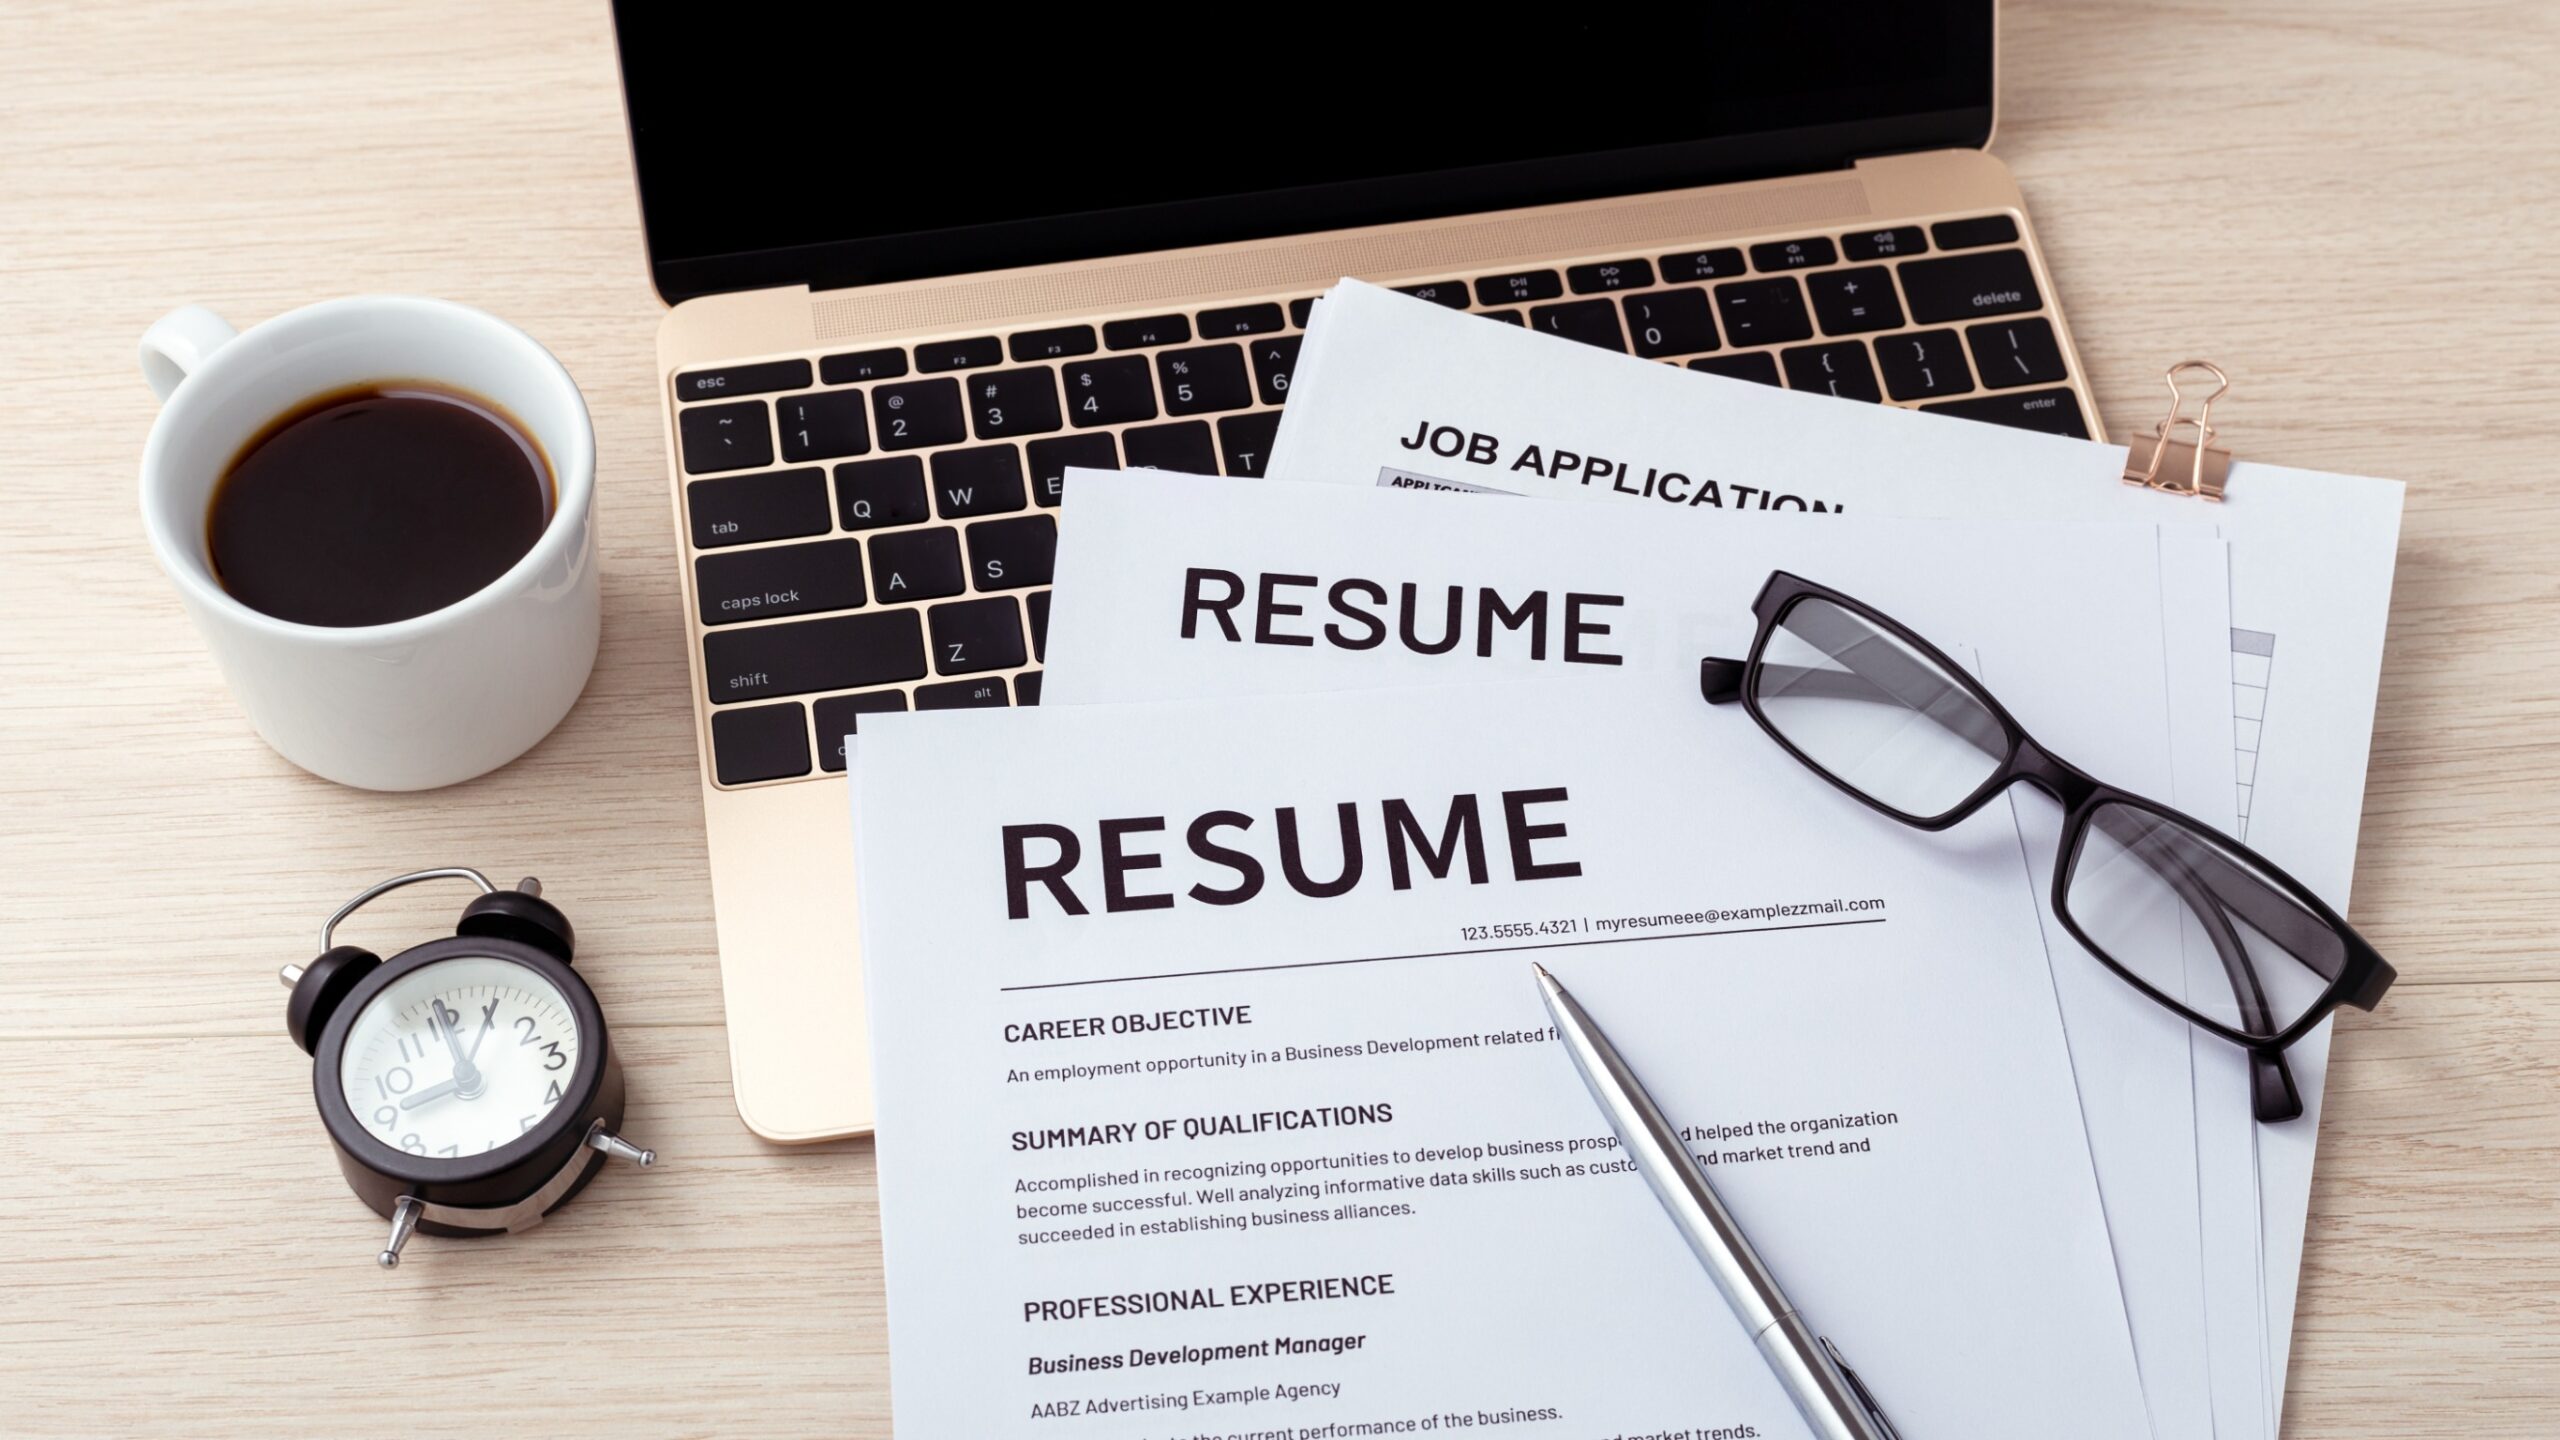 A Man Walks into a Bank – The Impact of a Resume